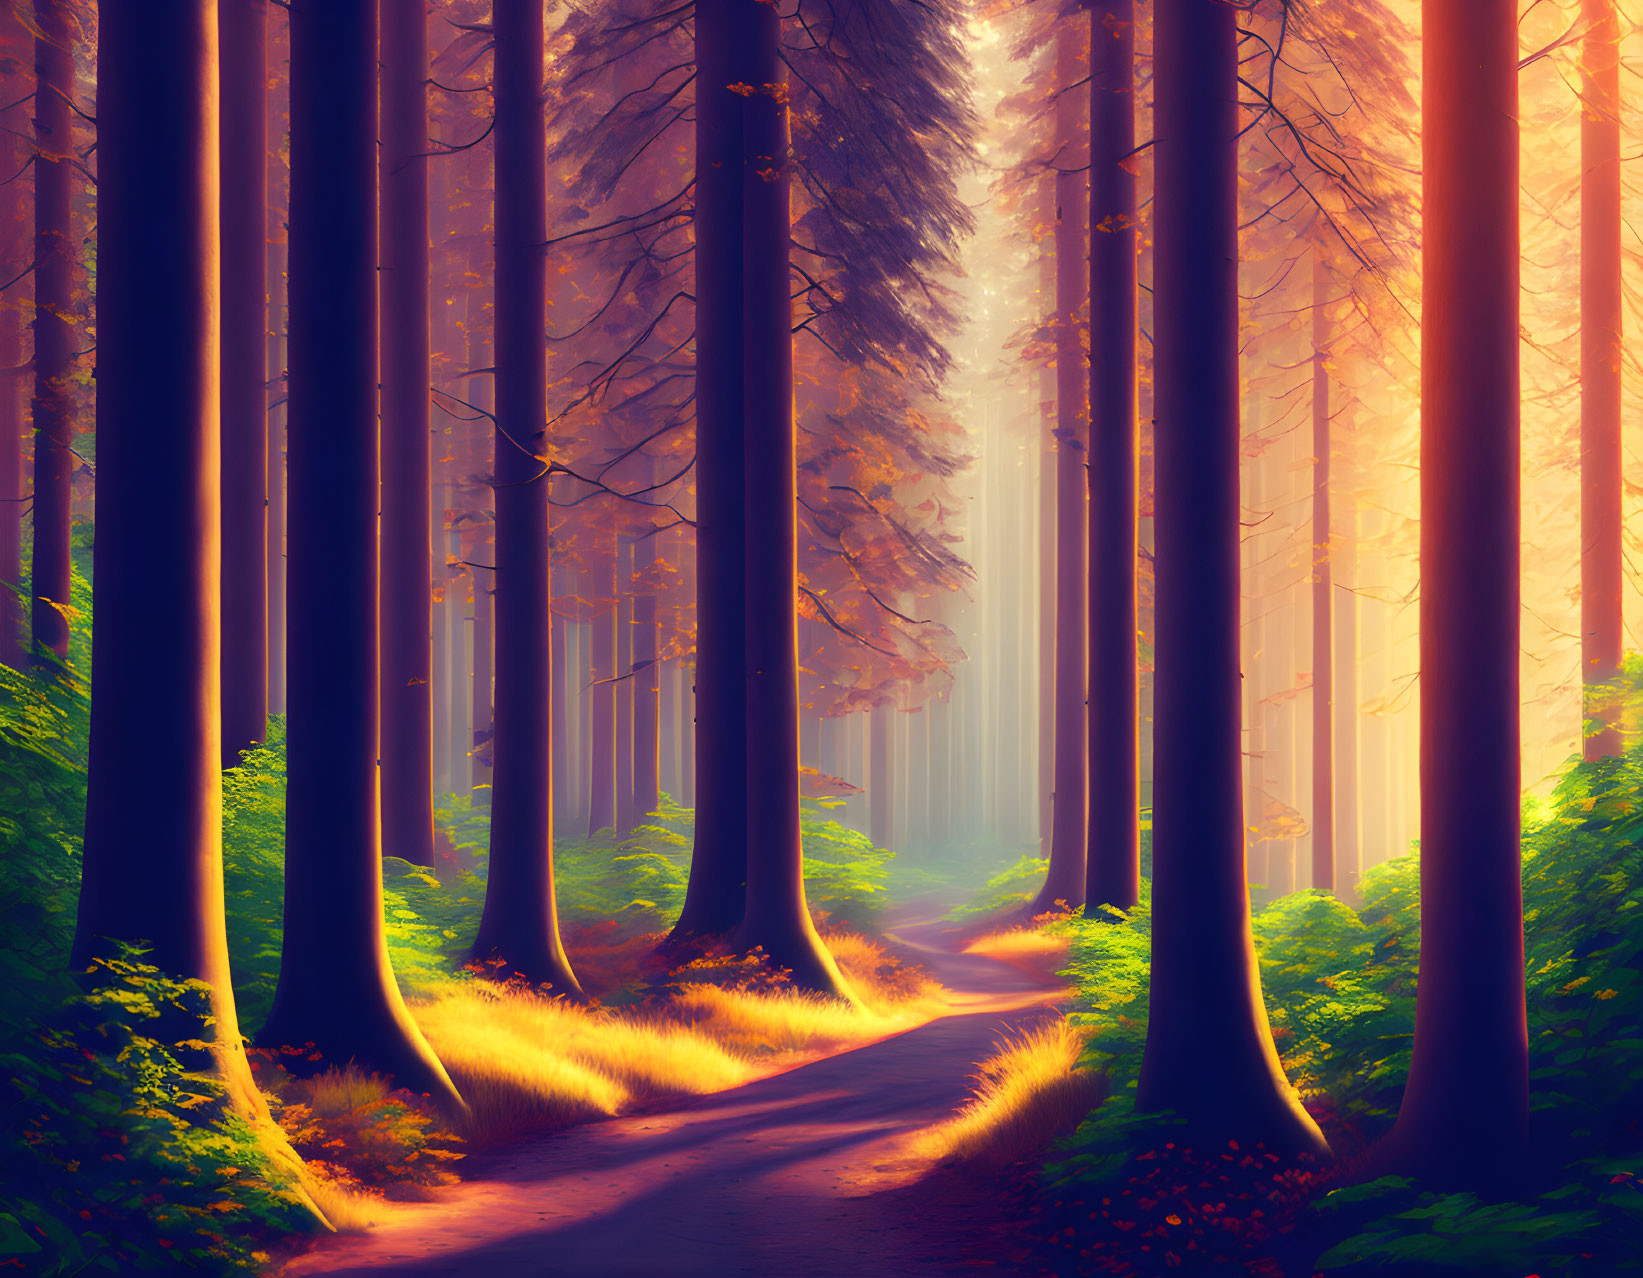 Tranquil forest path with tall trees and sunlight piercing through mist